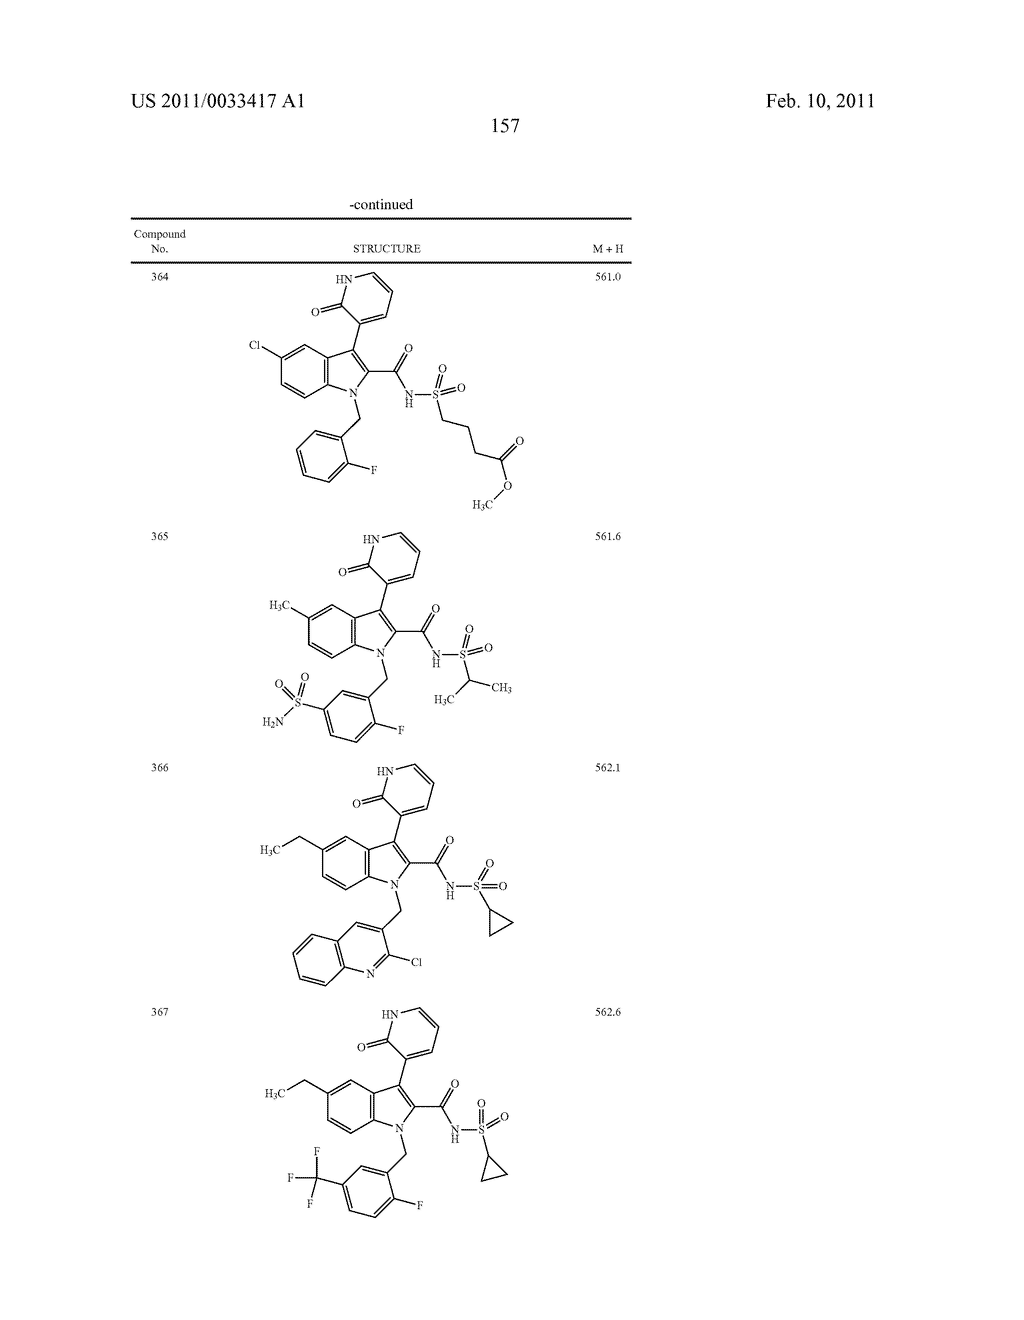 2,3-SUBSTITUTED INDOLE DERIVATIVES FOR TREATING VIRAL INFECTIONS - diagram, schematic, and image 158